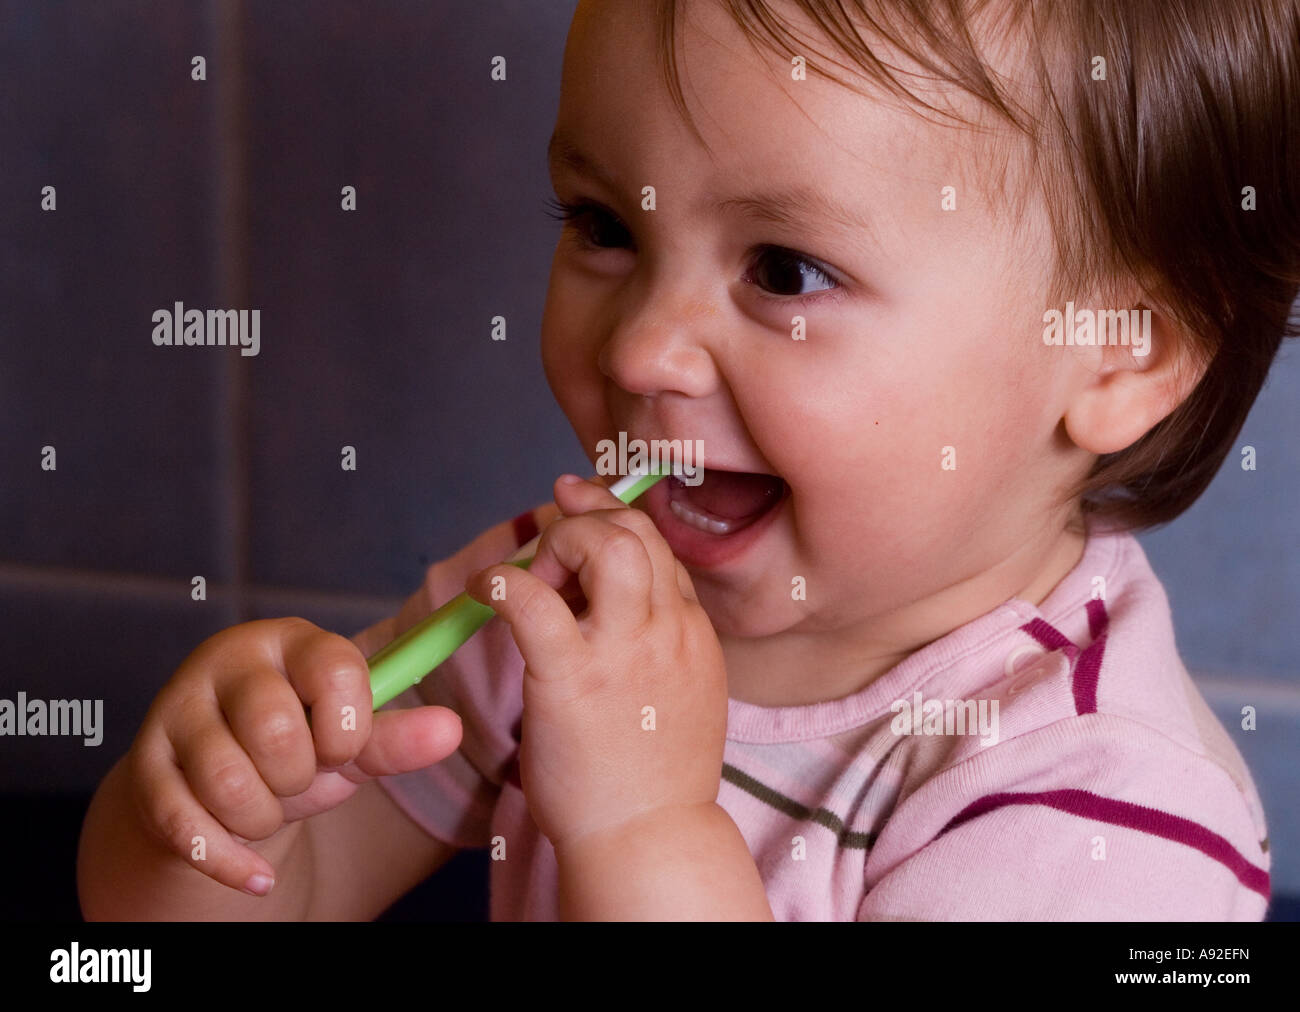 One year old girl brushes her milk teeth Stock Photo